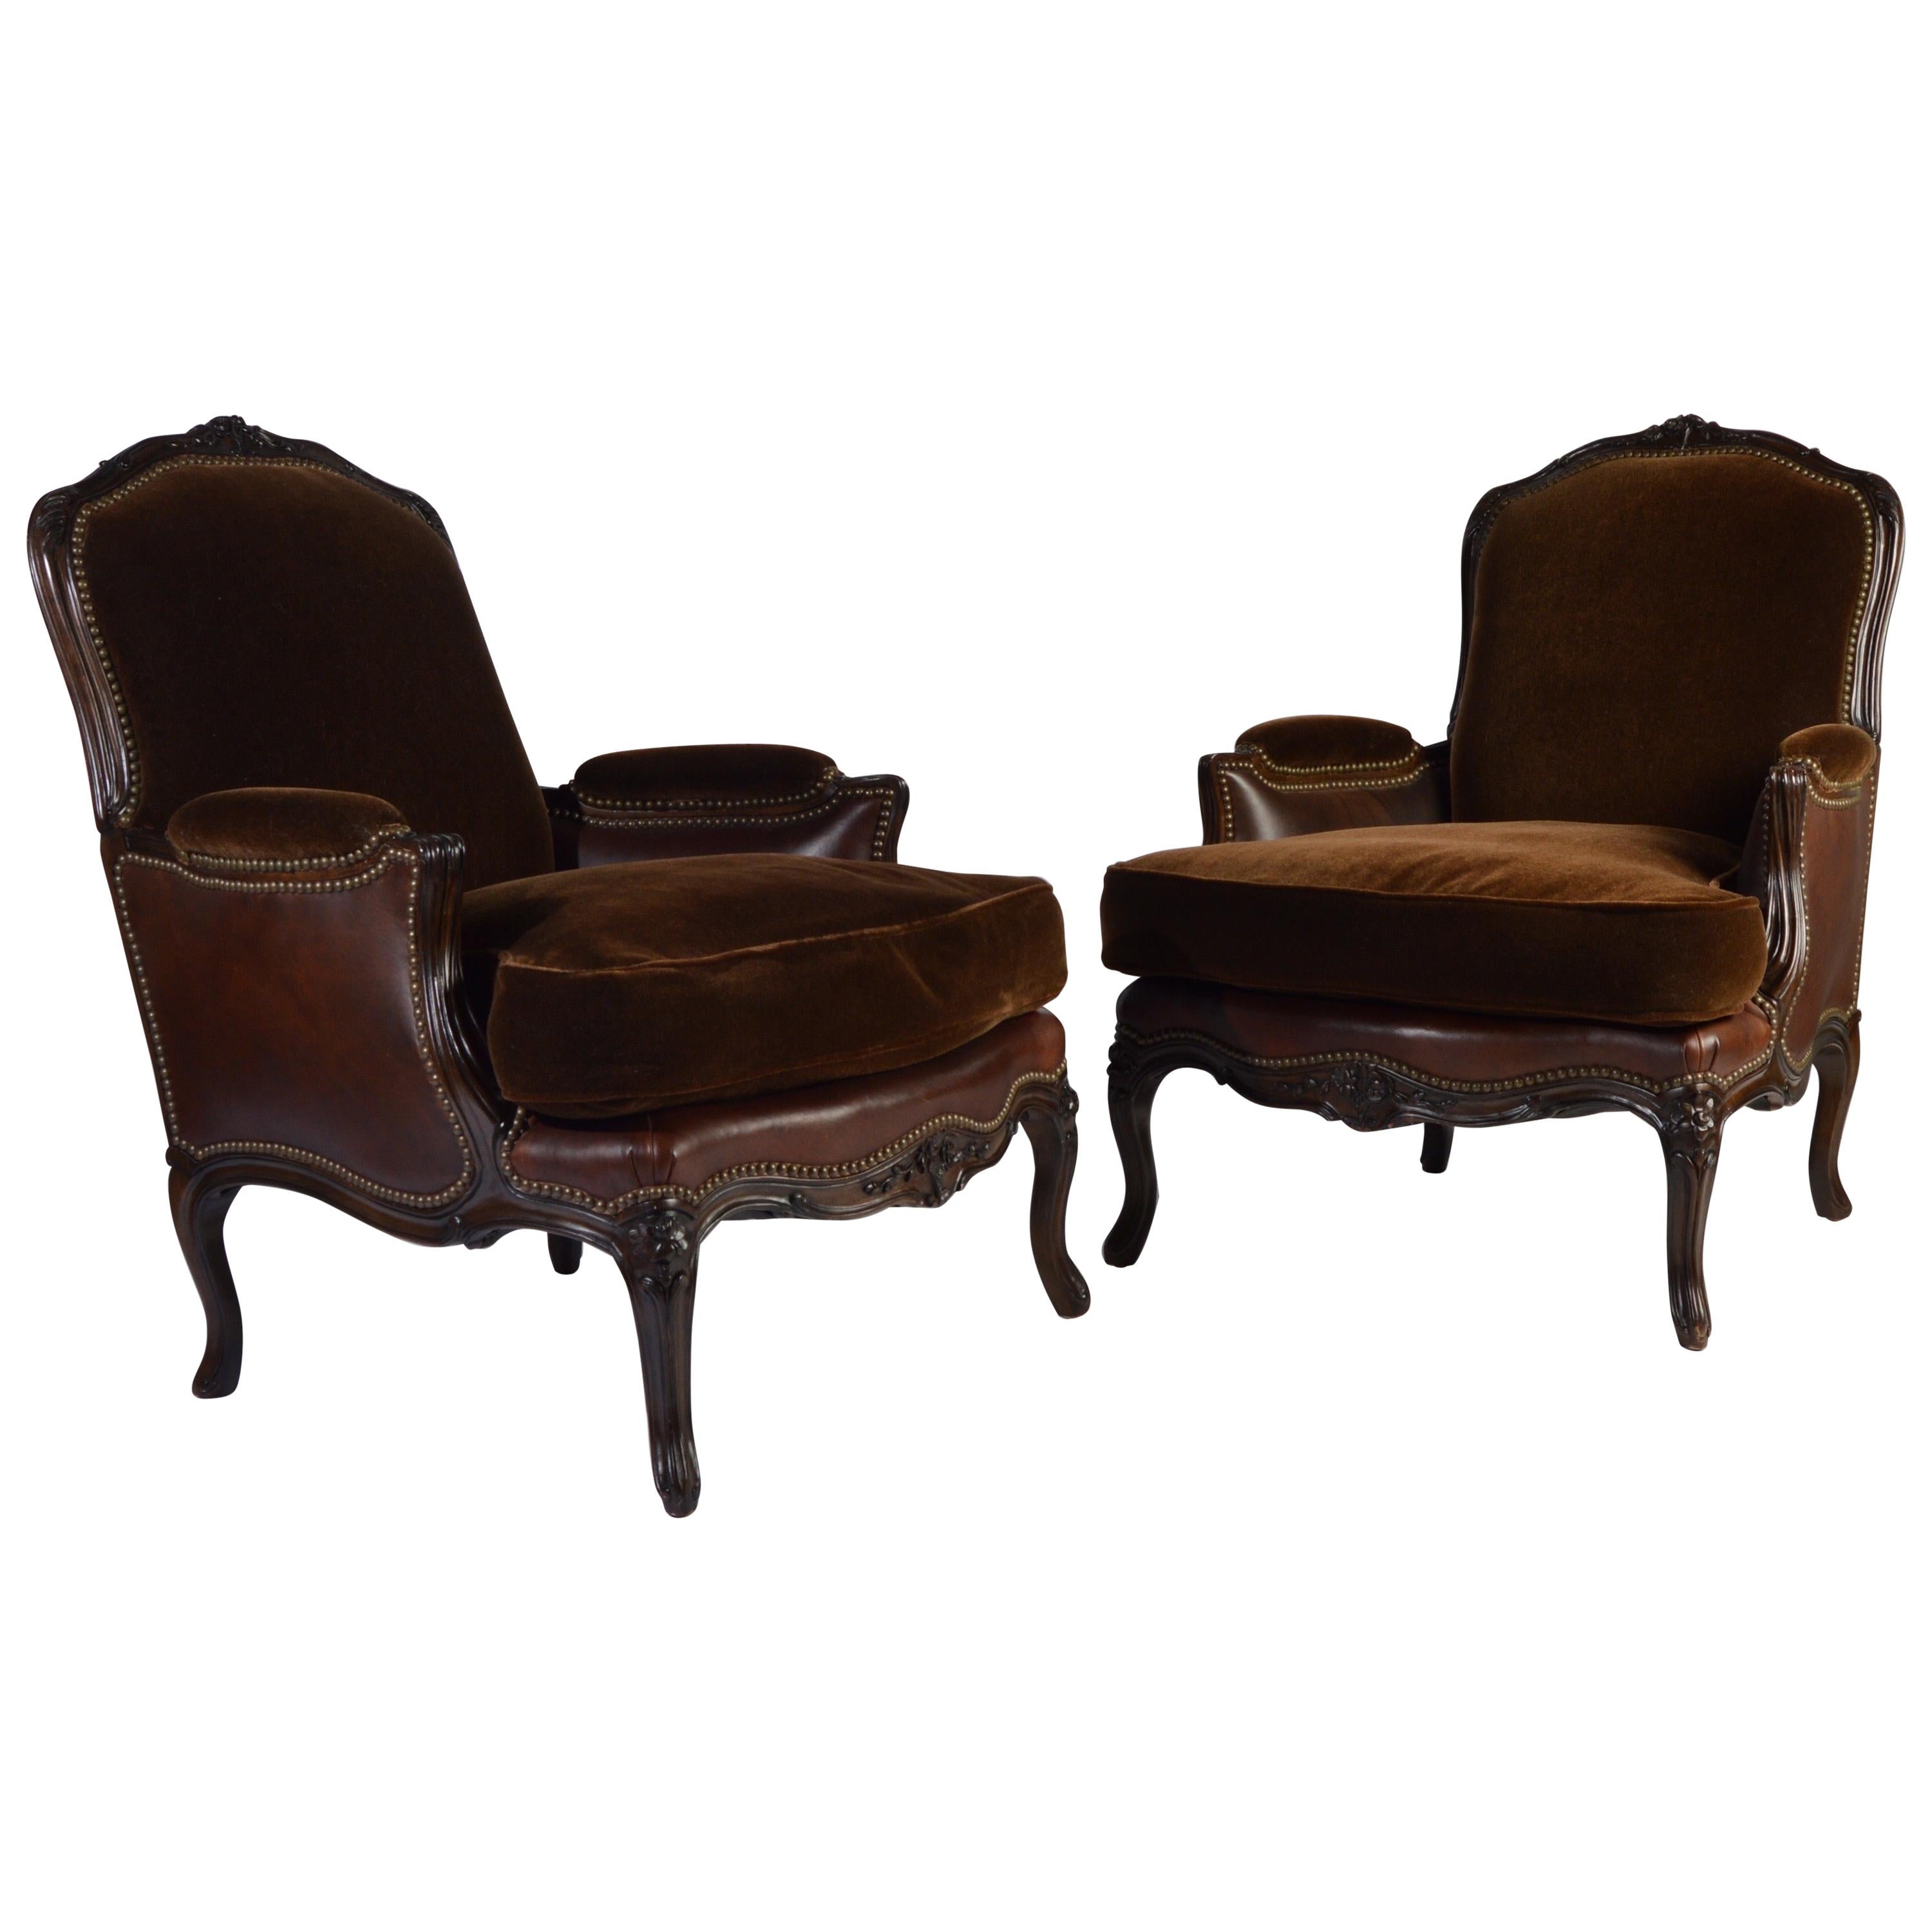 Bergère Louis XV Style Chairs in Mohair and Leather by Henredon